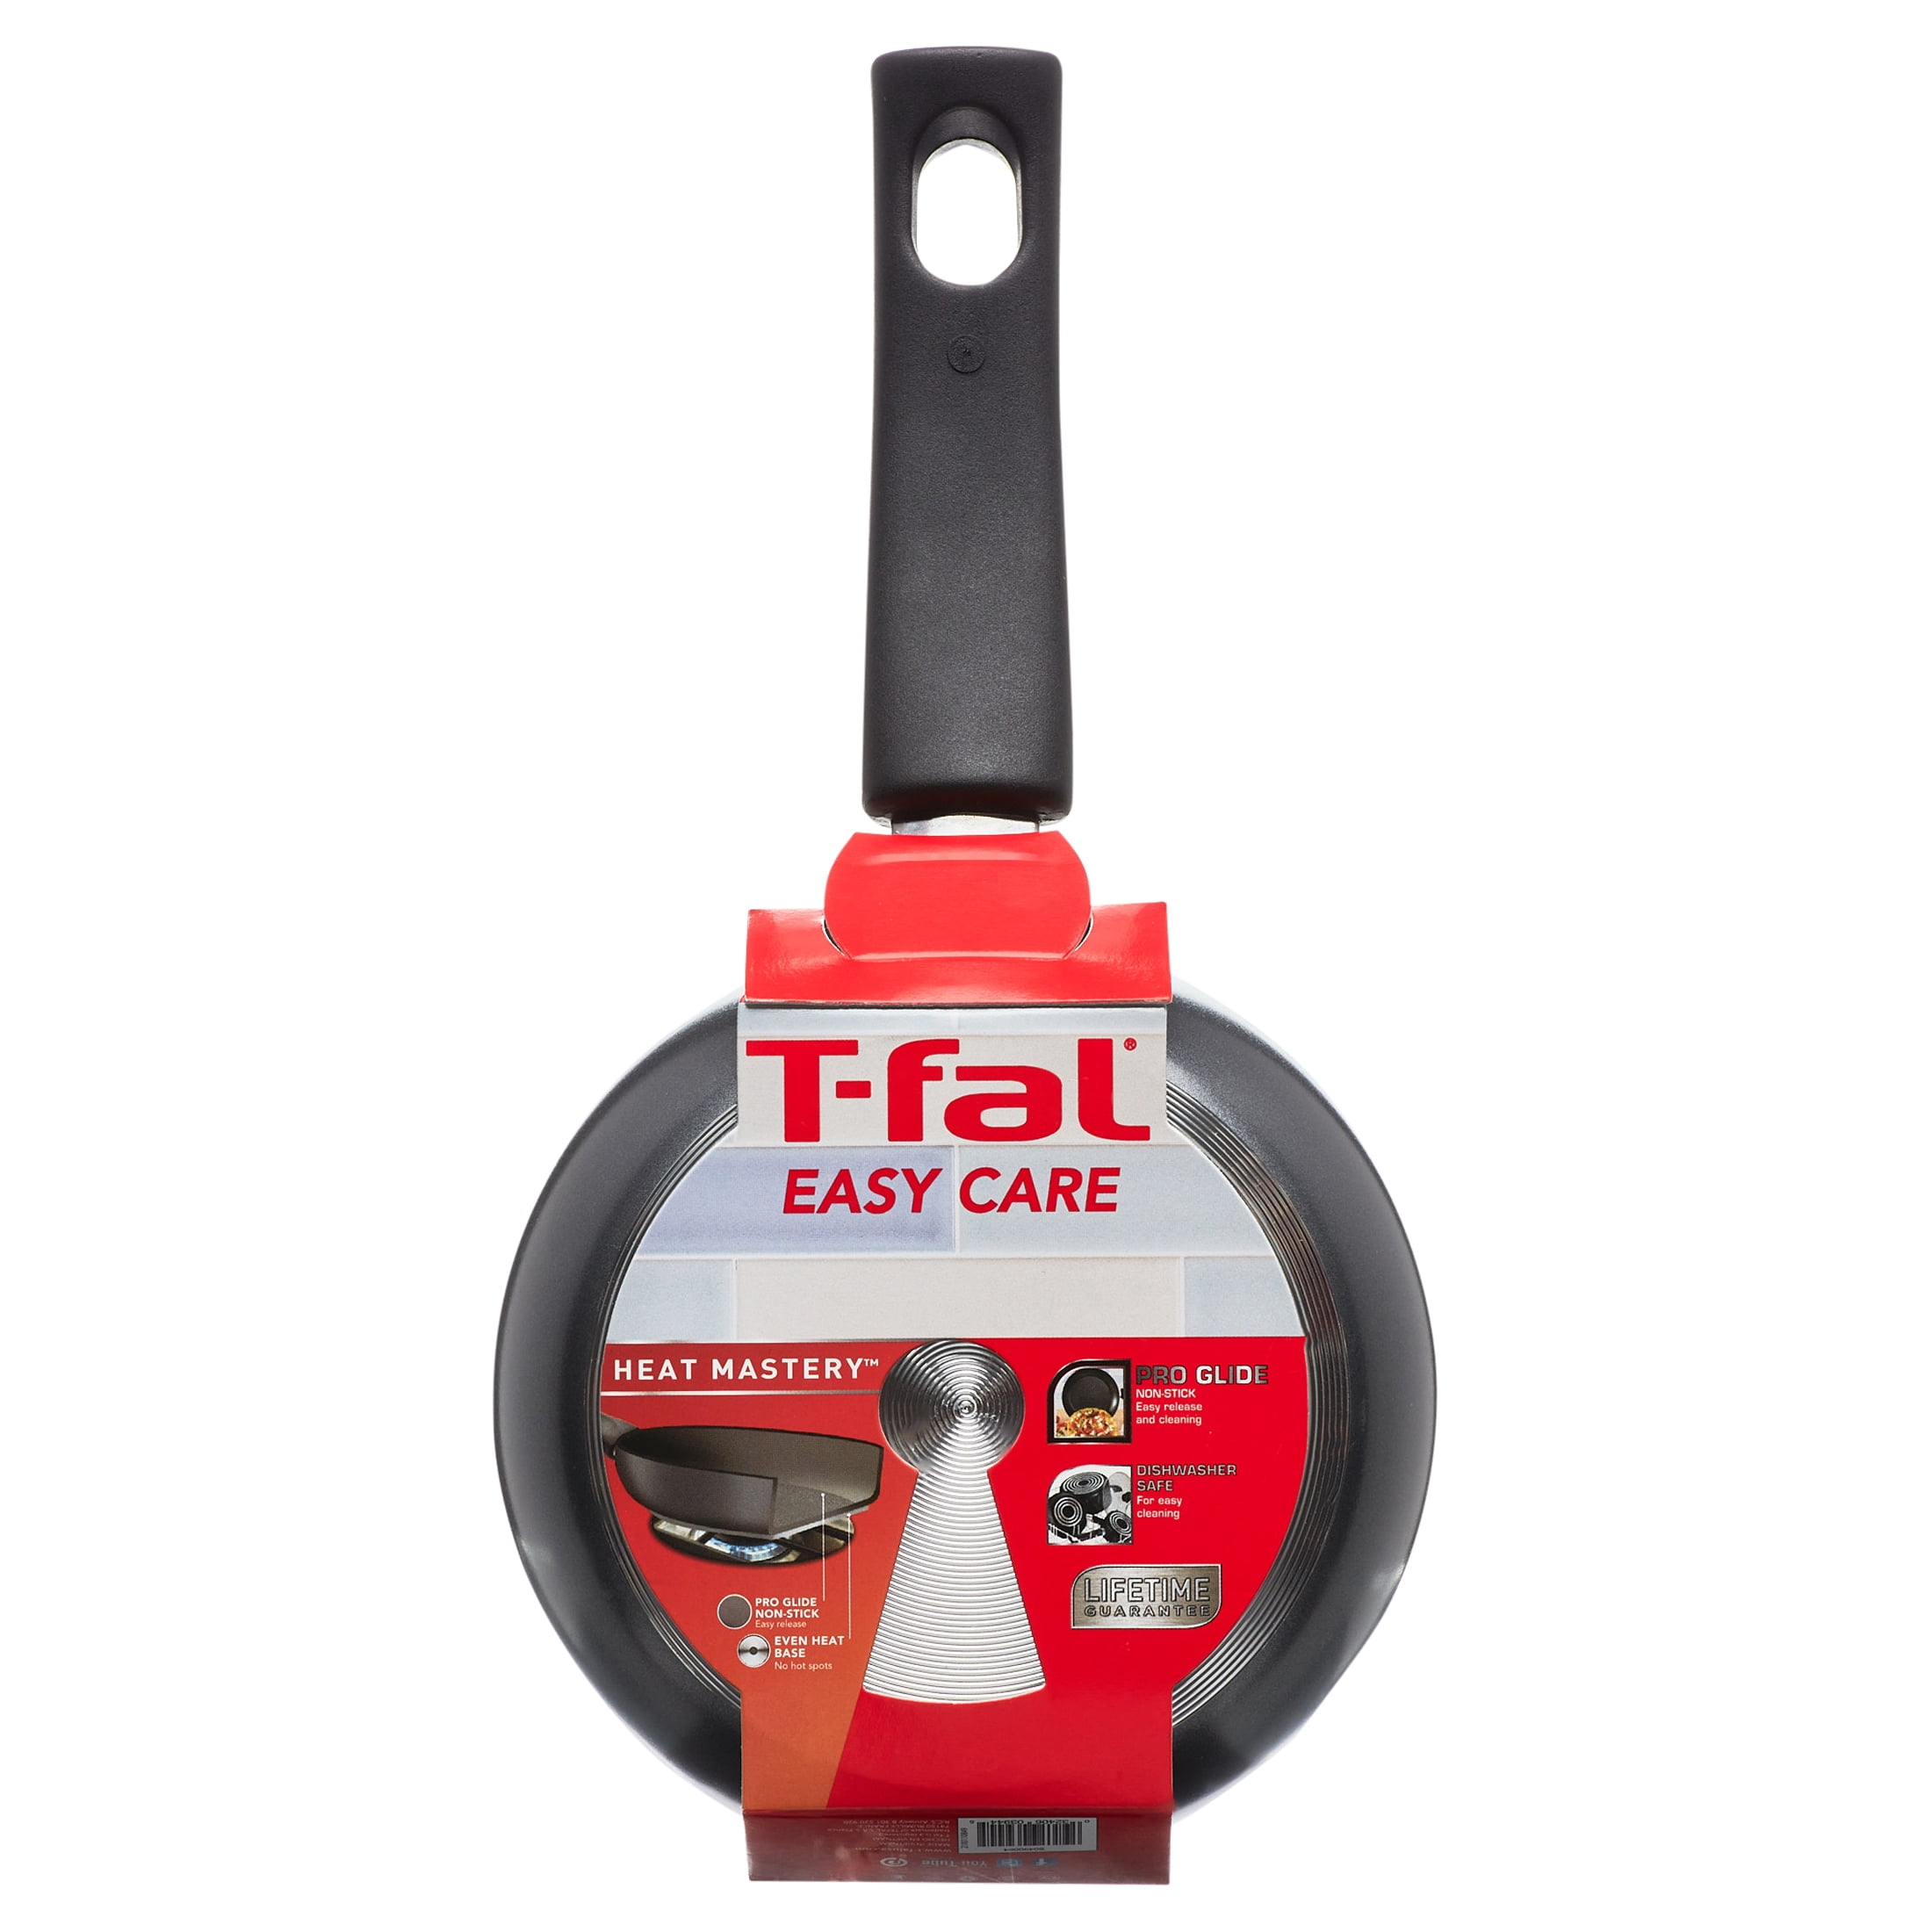 T-FAL T-fal Easy Care Non-Stick 4.7” One Egg Wonder with Lid